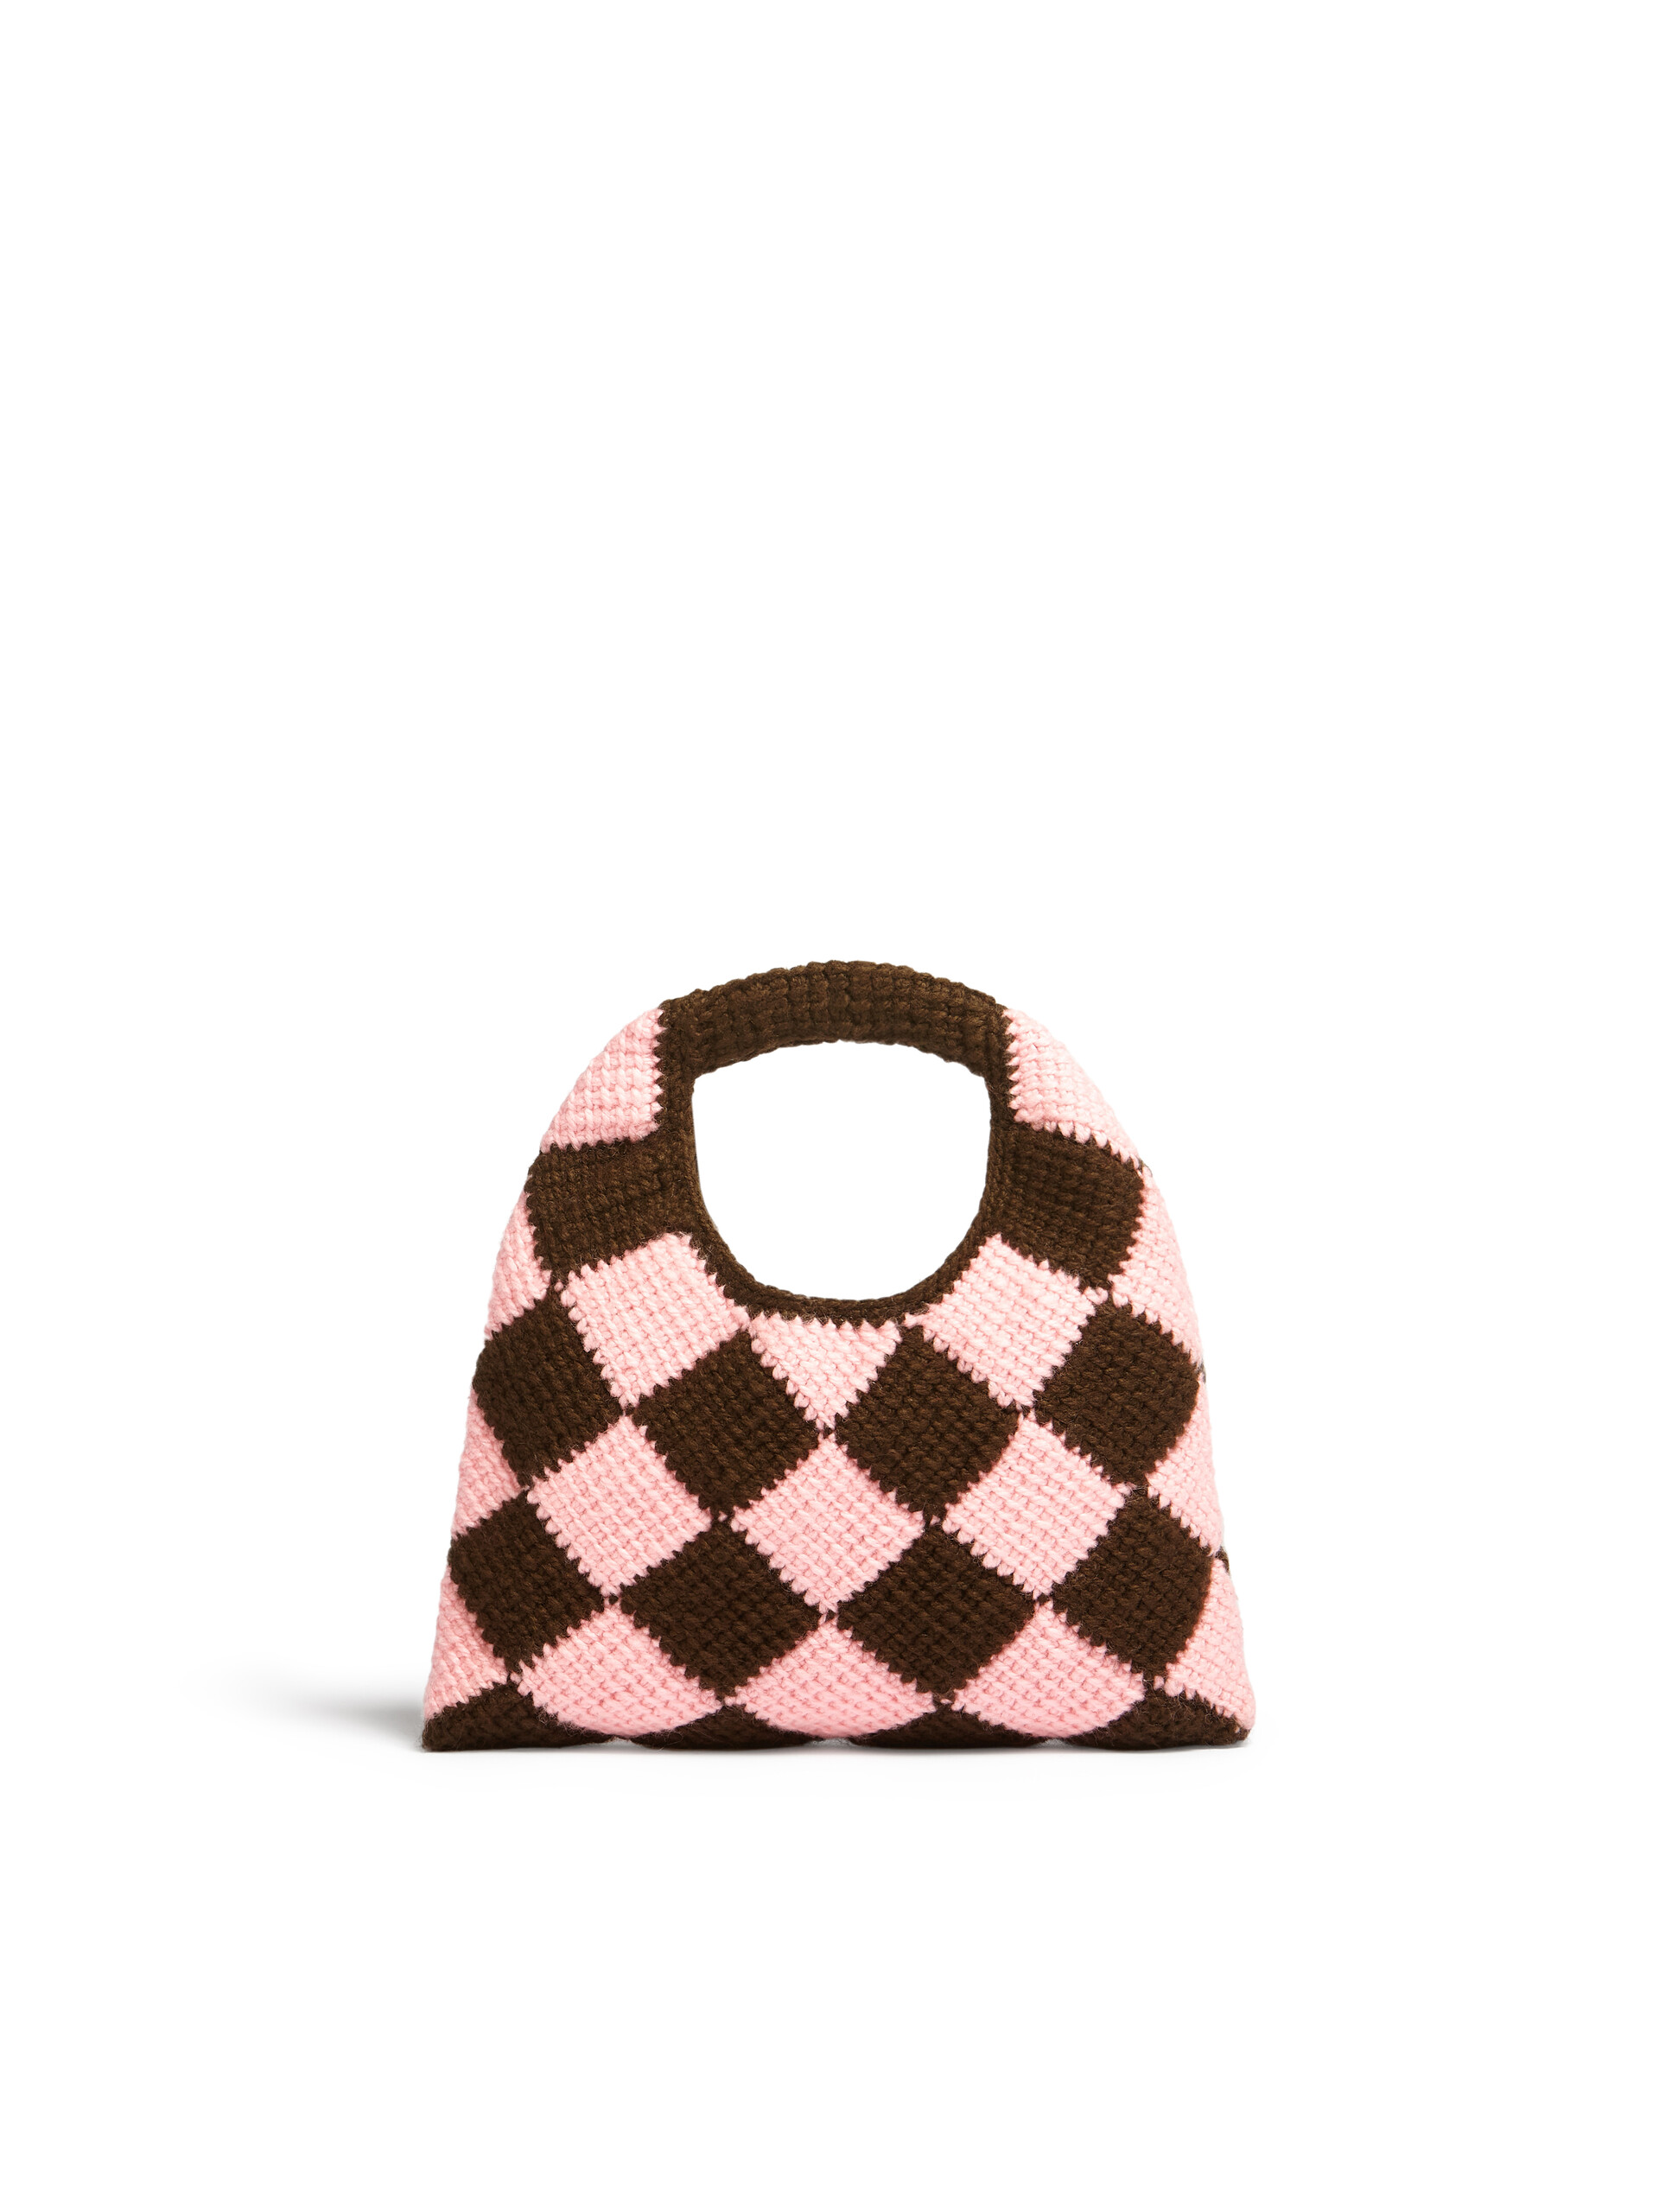 MARNI MARKET DIAMOND small bag in brown and pink tech wool - Bags - Image 3